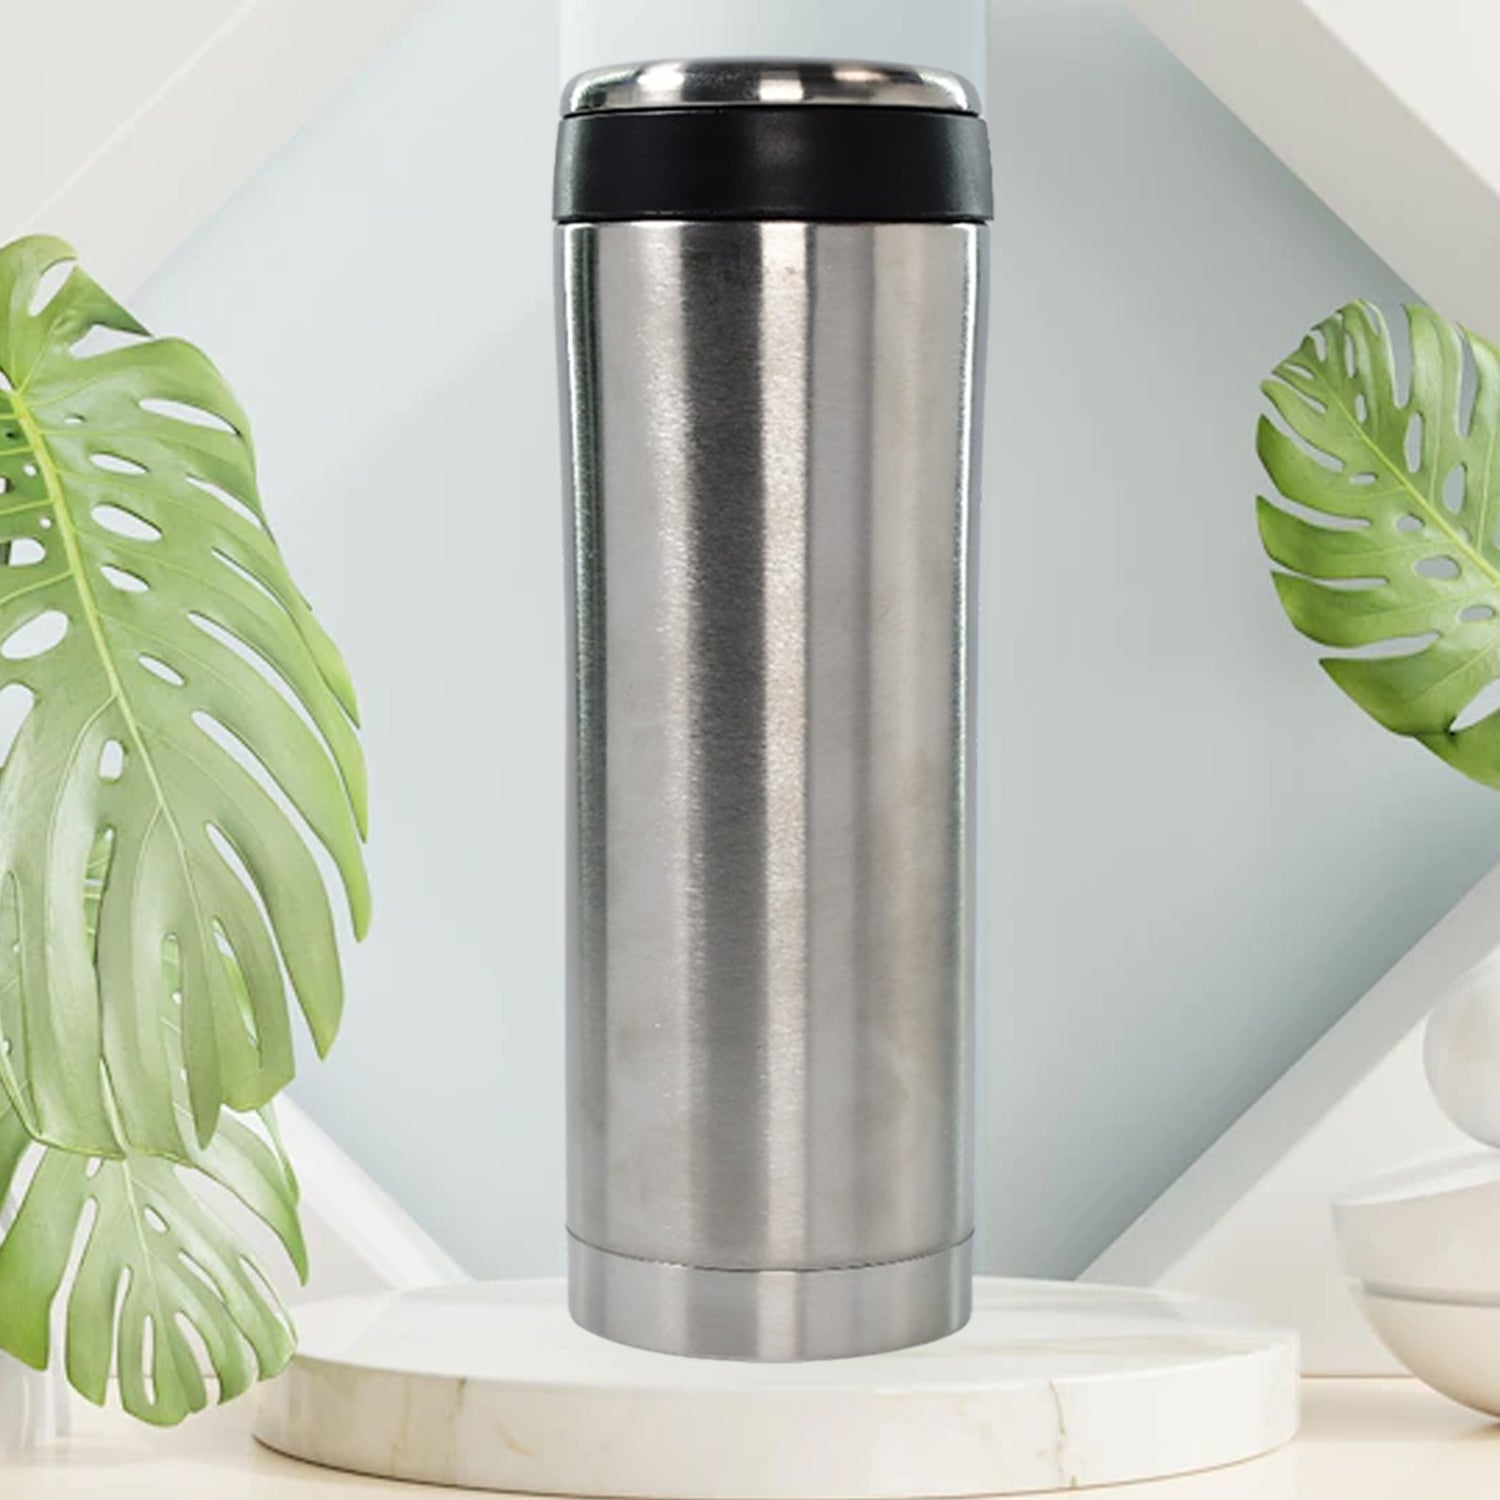 6446 450Ml STAINLESS STEEL WATER BOTTLE FOR MEN WOMEN KIDS | THERMOS FLASK | REUSABLE LEAK-PROOF THERMOS STEEL FOR HOME OFFICE GYM FRIDGE TRAVELLING DeoDap